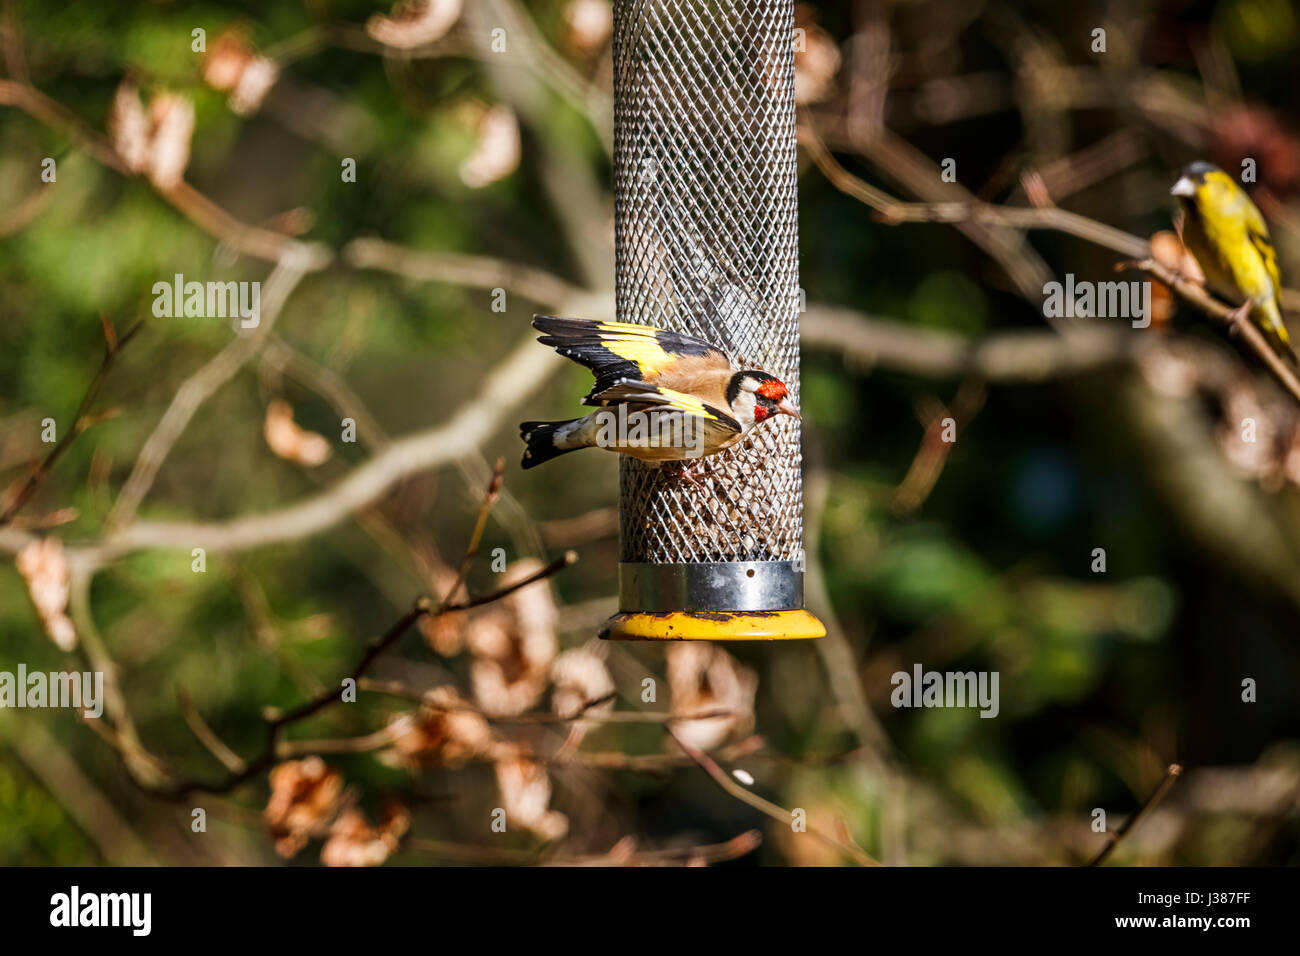 Small European goldfinch (Carduelis carduelis) feeding at a bird feeder shows its wings as a Eurasian siskin (Carduelis spinus) looks on, Surrey, UK Stock Photo